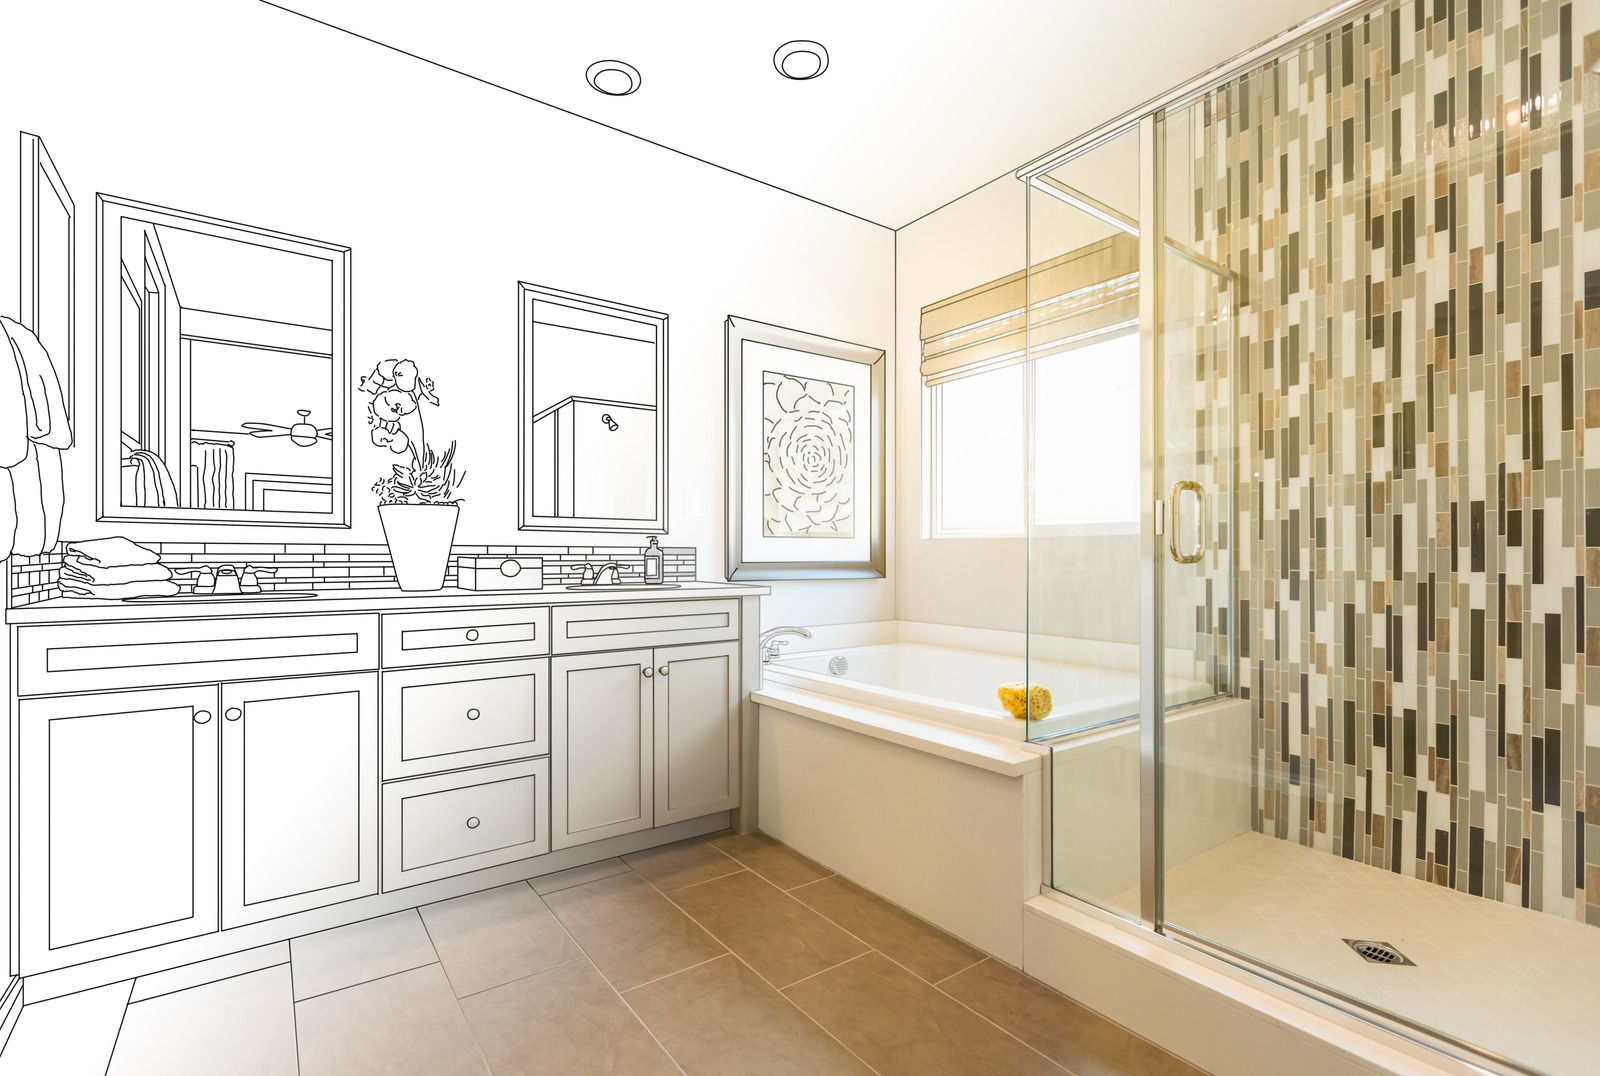 Is Bathroom Renovations Worth the Time and Expense